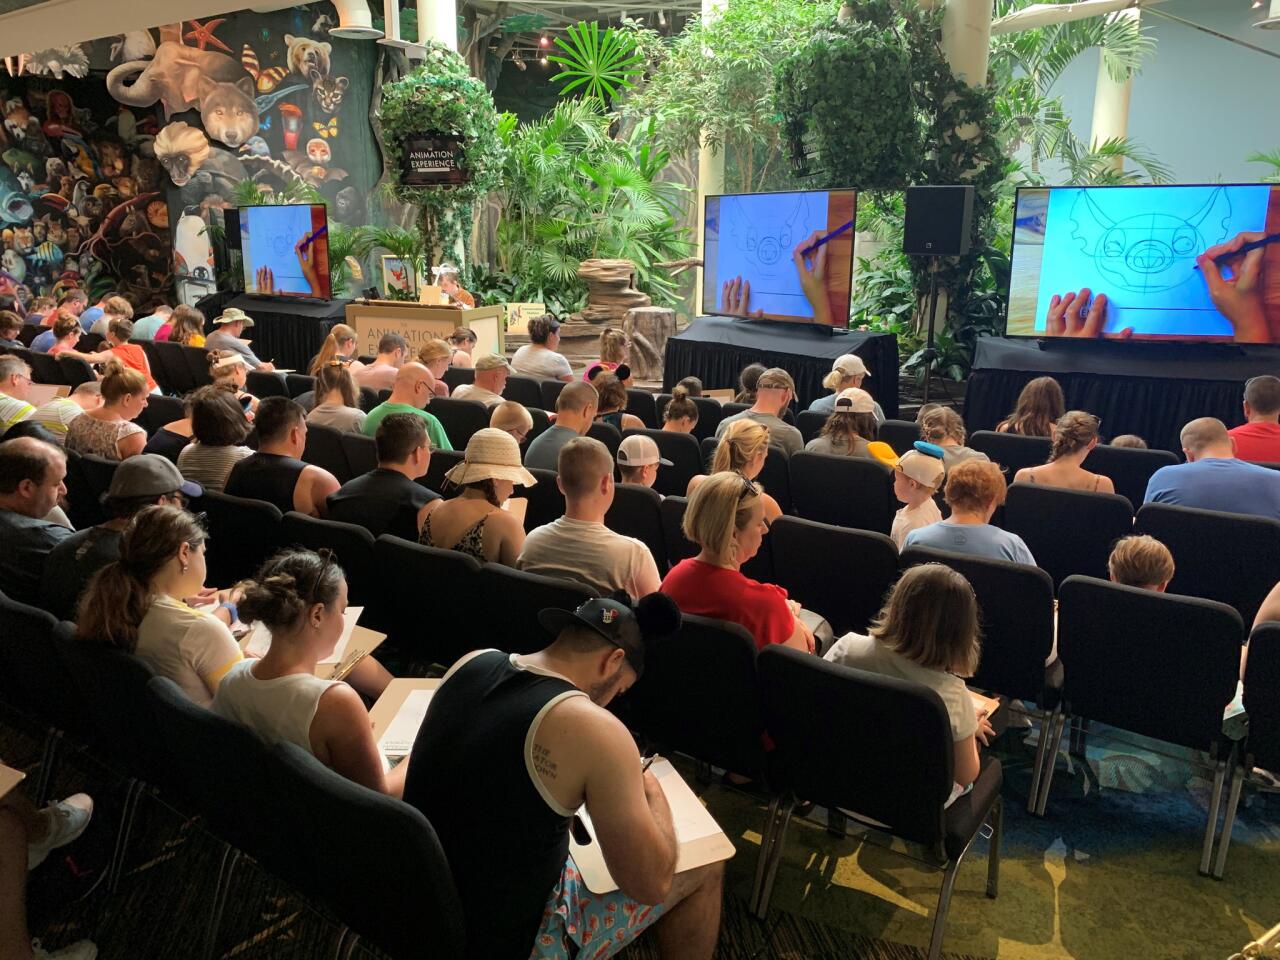 Visitors to Disney's Animal Kingdom theme park take part in the Animation Experience at Conservation Station, a new activity at the recently reopened Rafiki's Planet Watch at Walt Disney World.